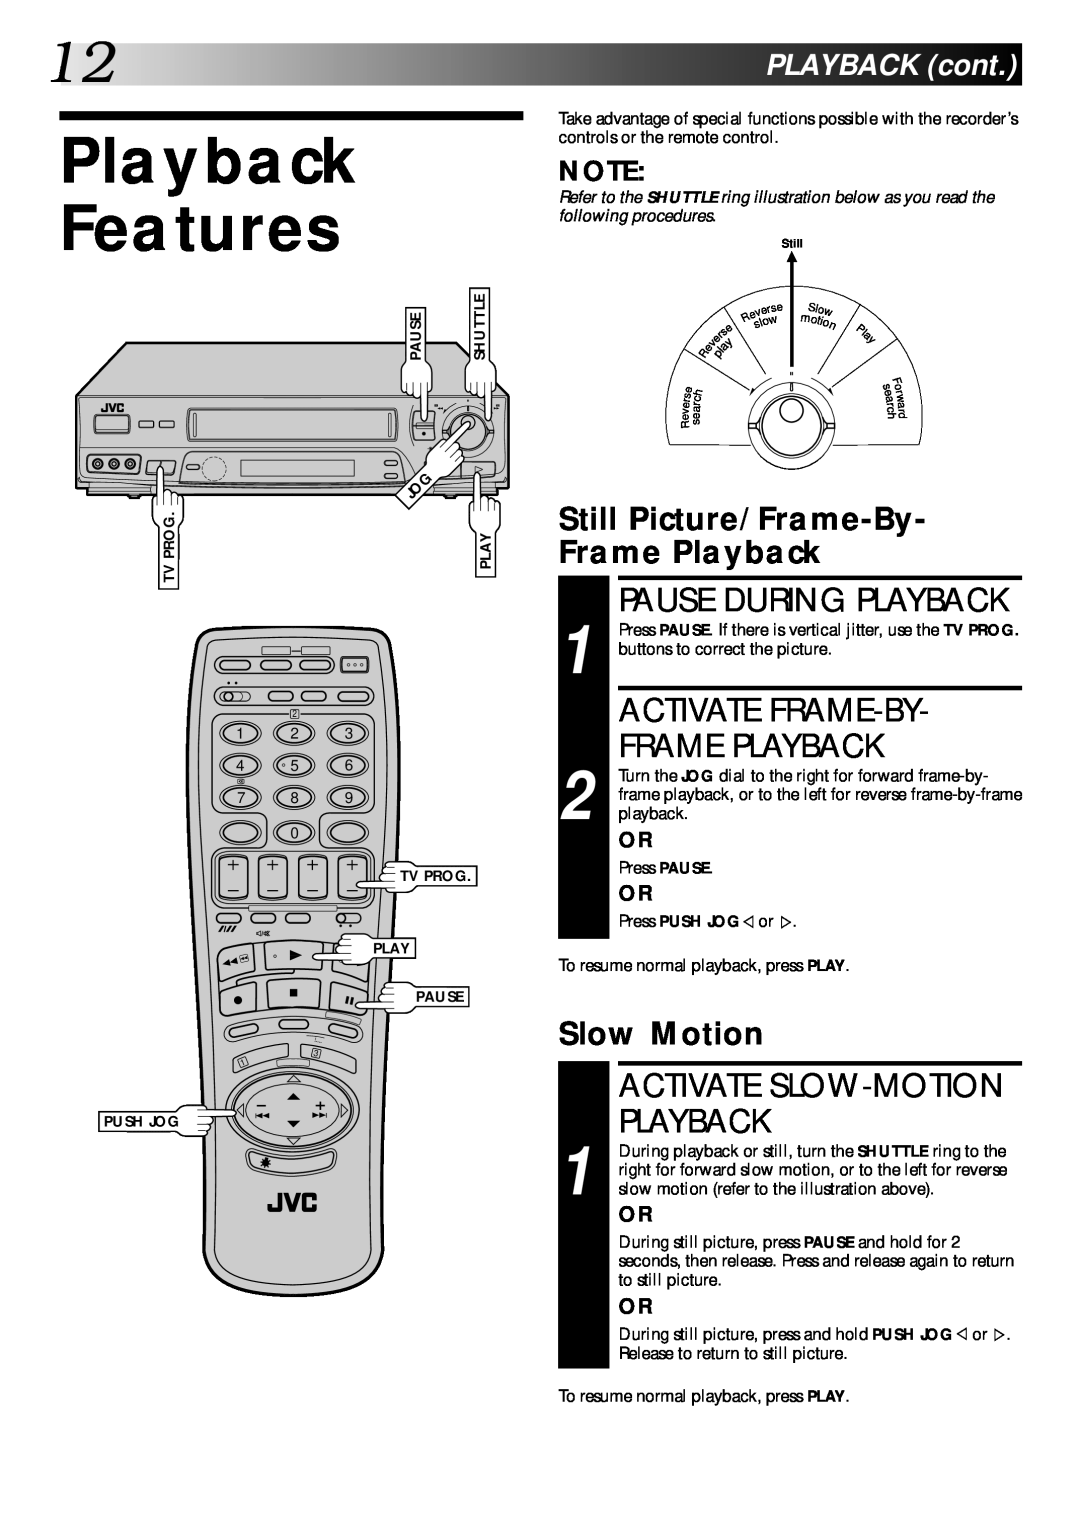 JVC PU30425 Playback Features, Pause During Playback, Activate Frame-By Frame Playback, PLAYBACK cont, Slow Motion 